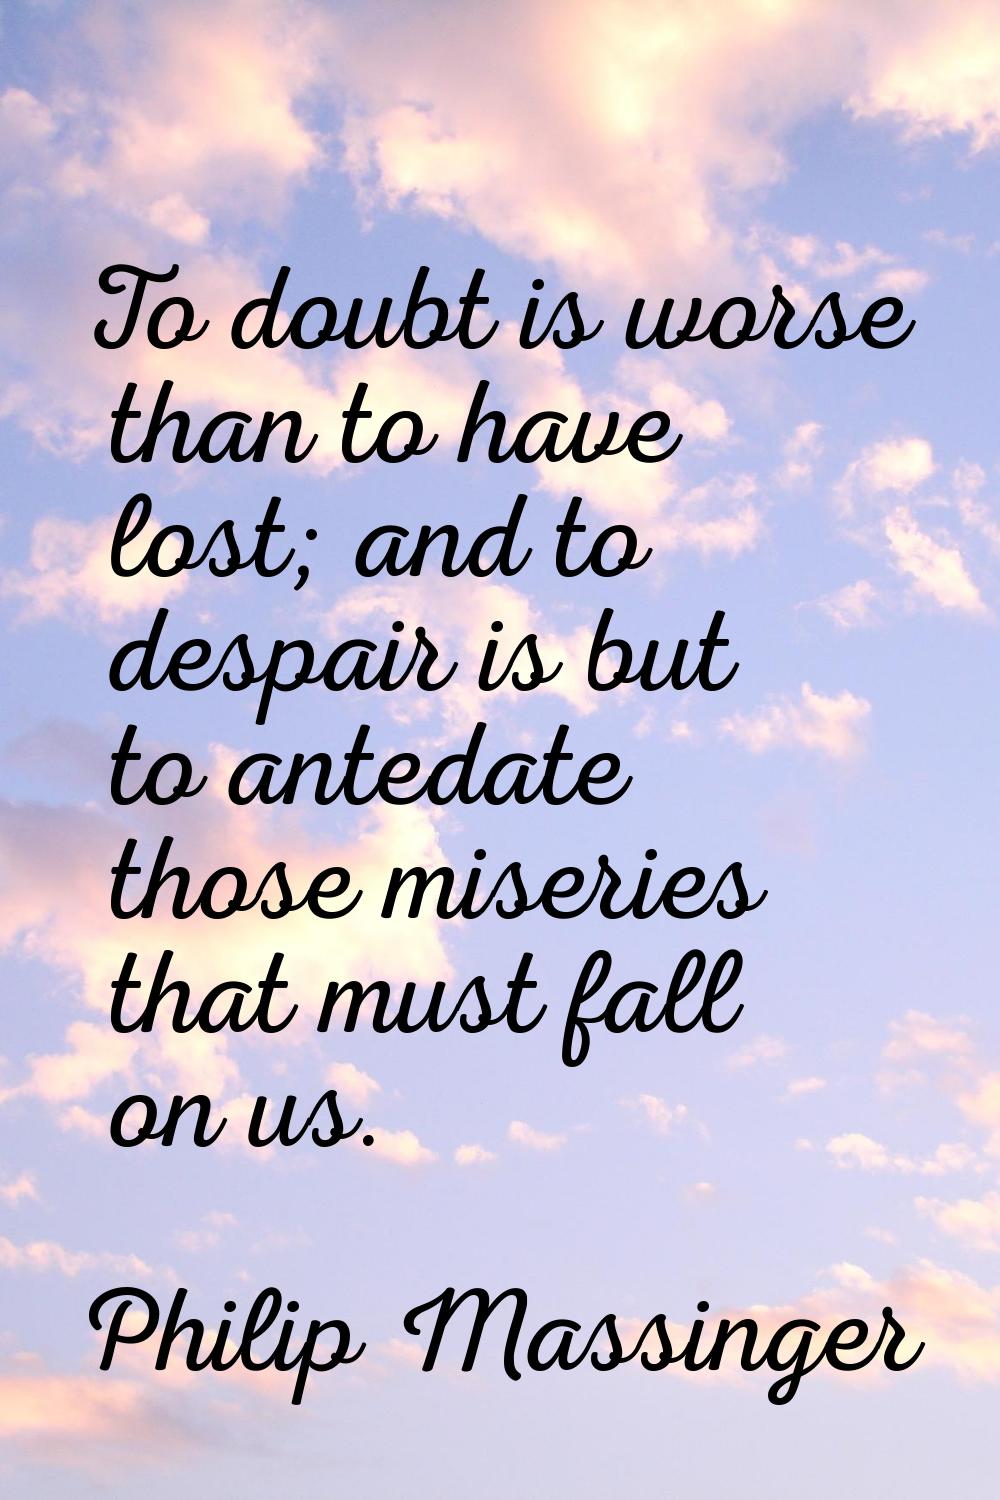 To doubt is worse than to have lost; and to despair is but to antedate those miseries that must fal